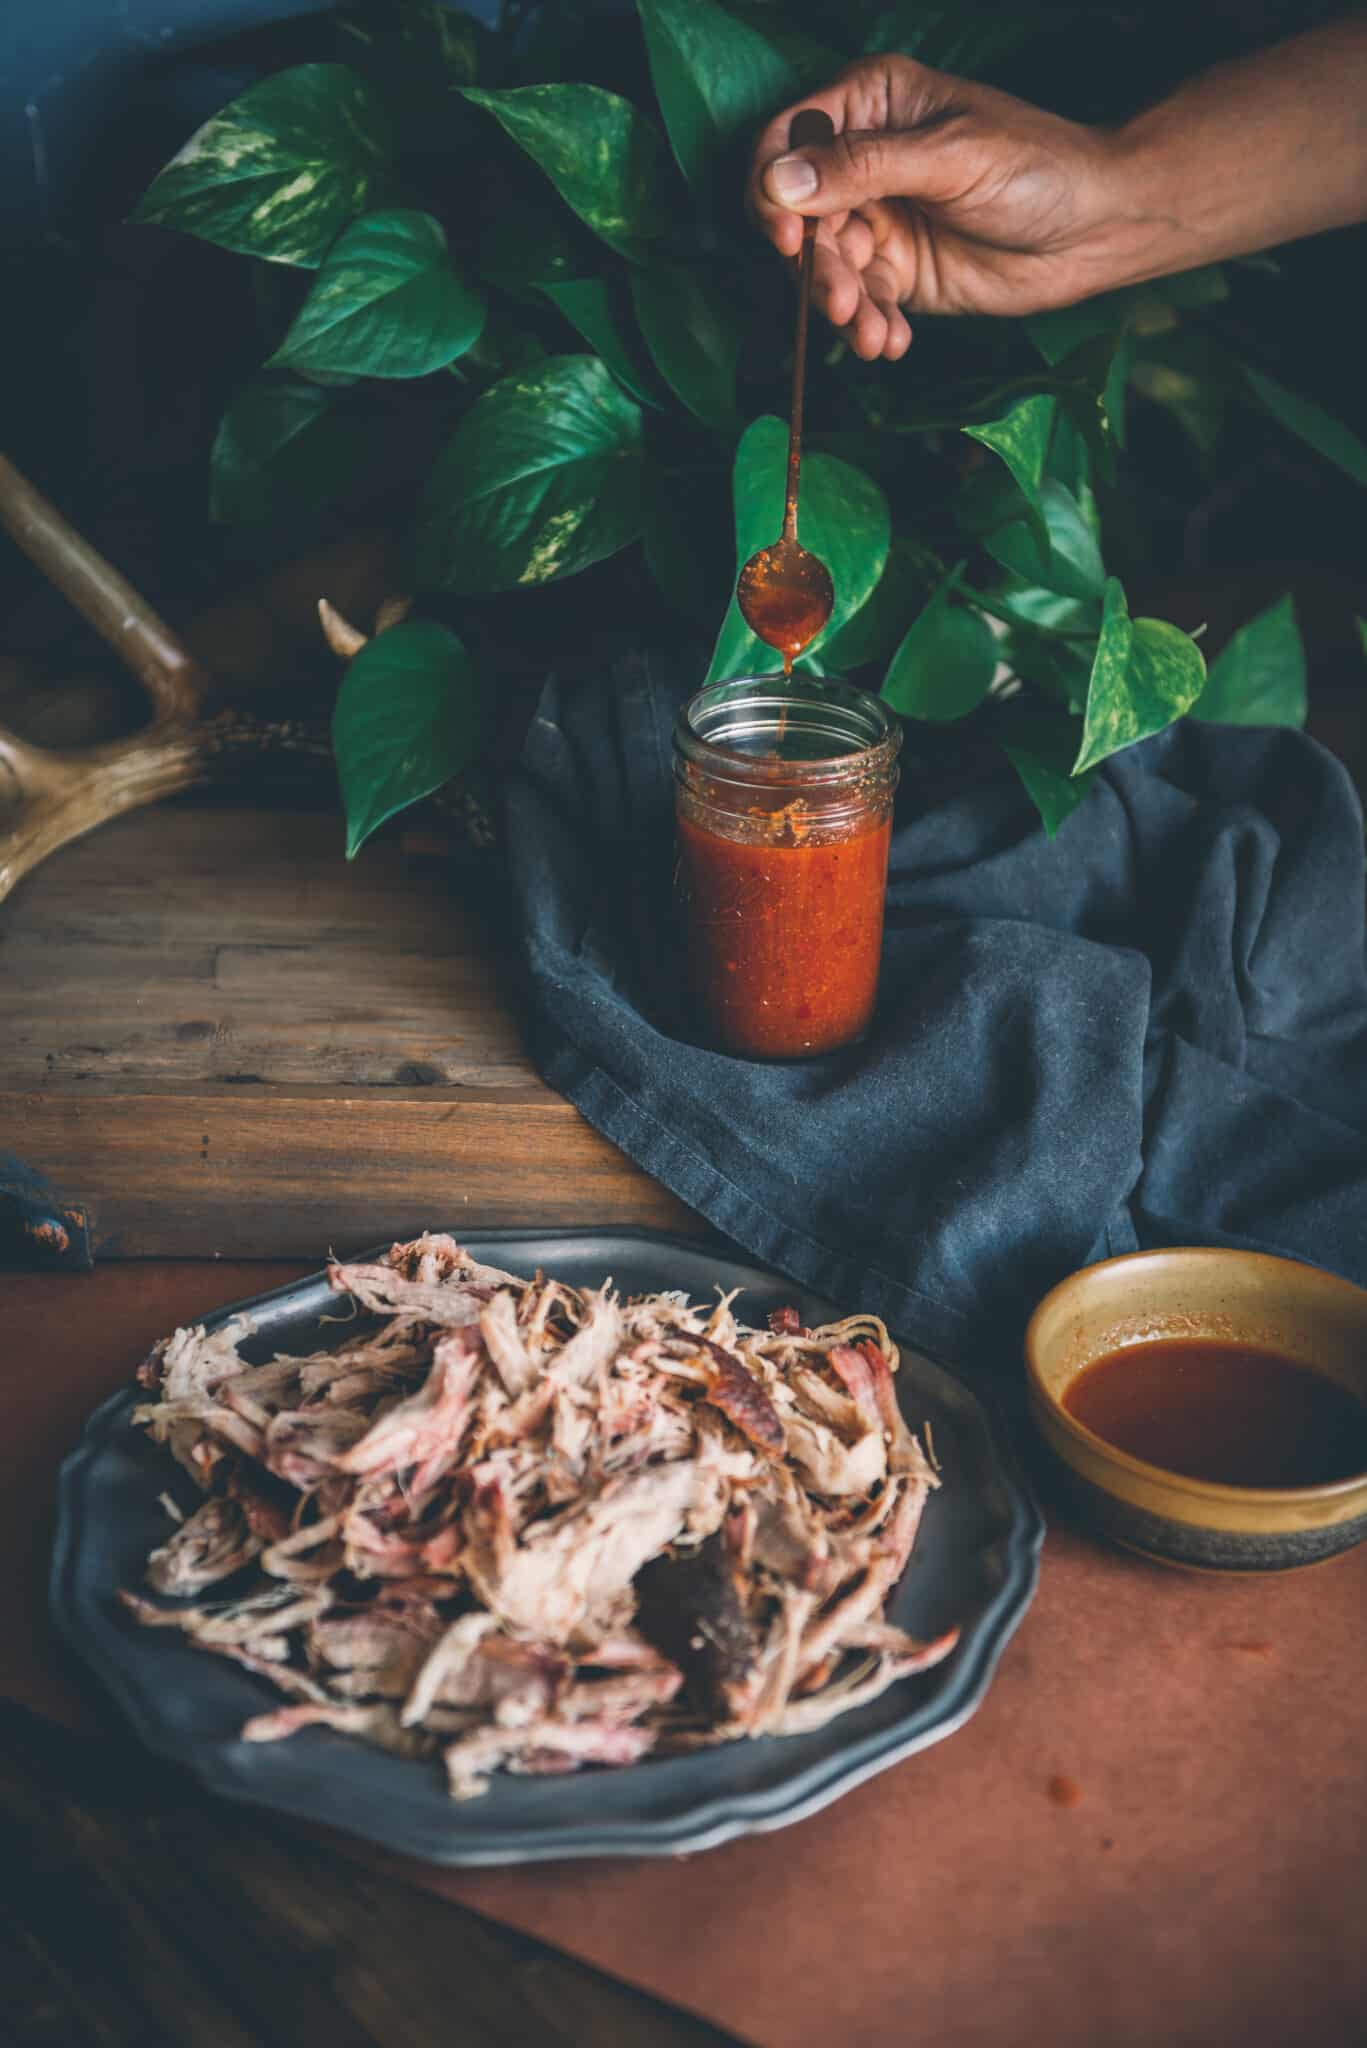 Hand picking up spoon of homemade vinegar bbq sauce our of a jar behind  platter of pulled pork.